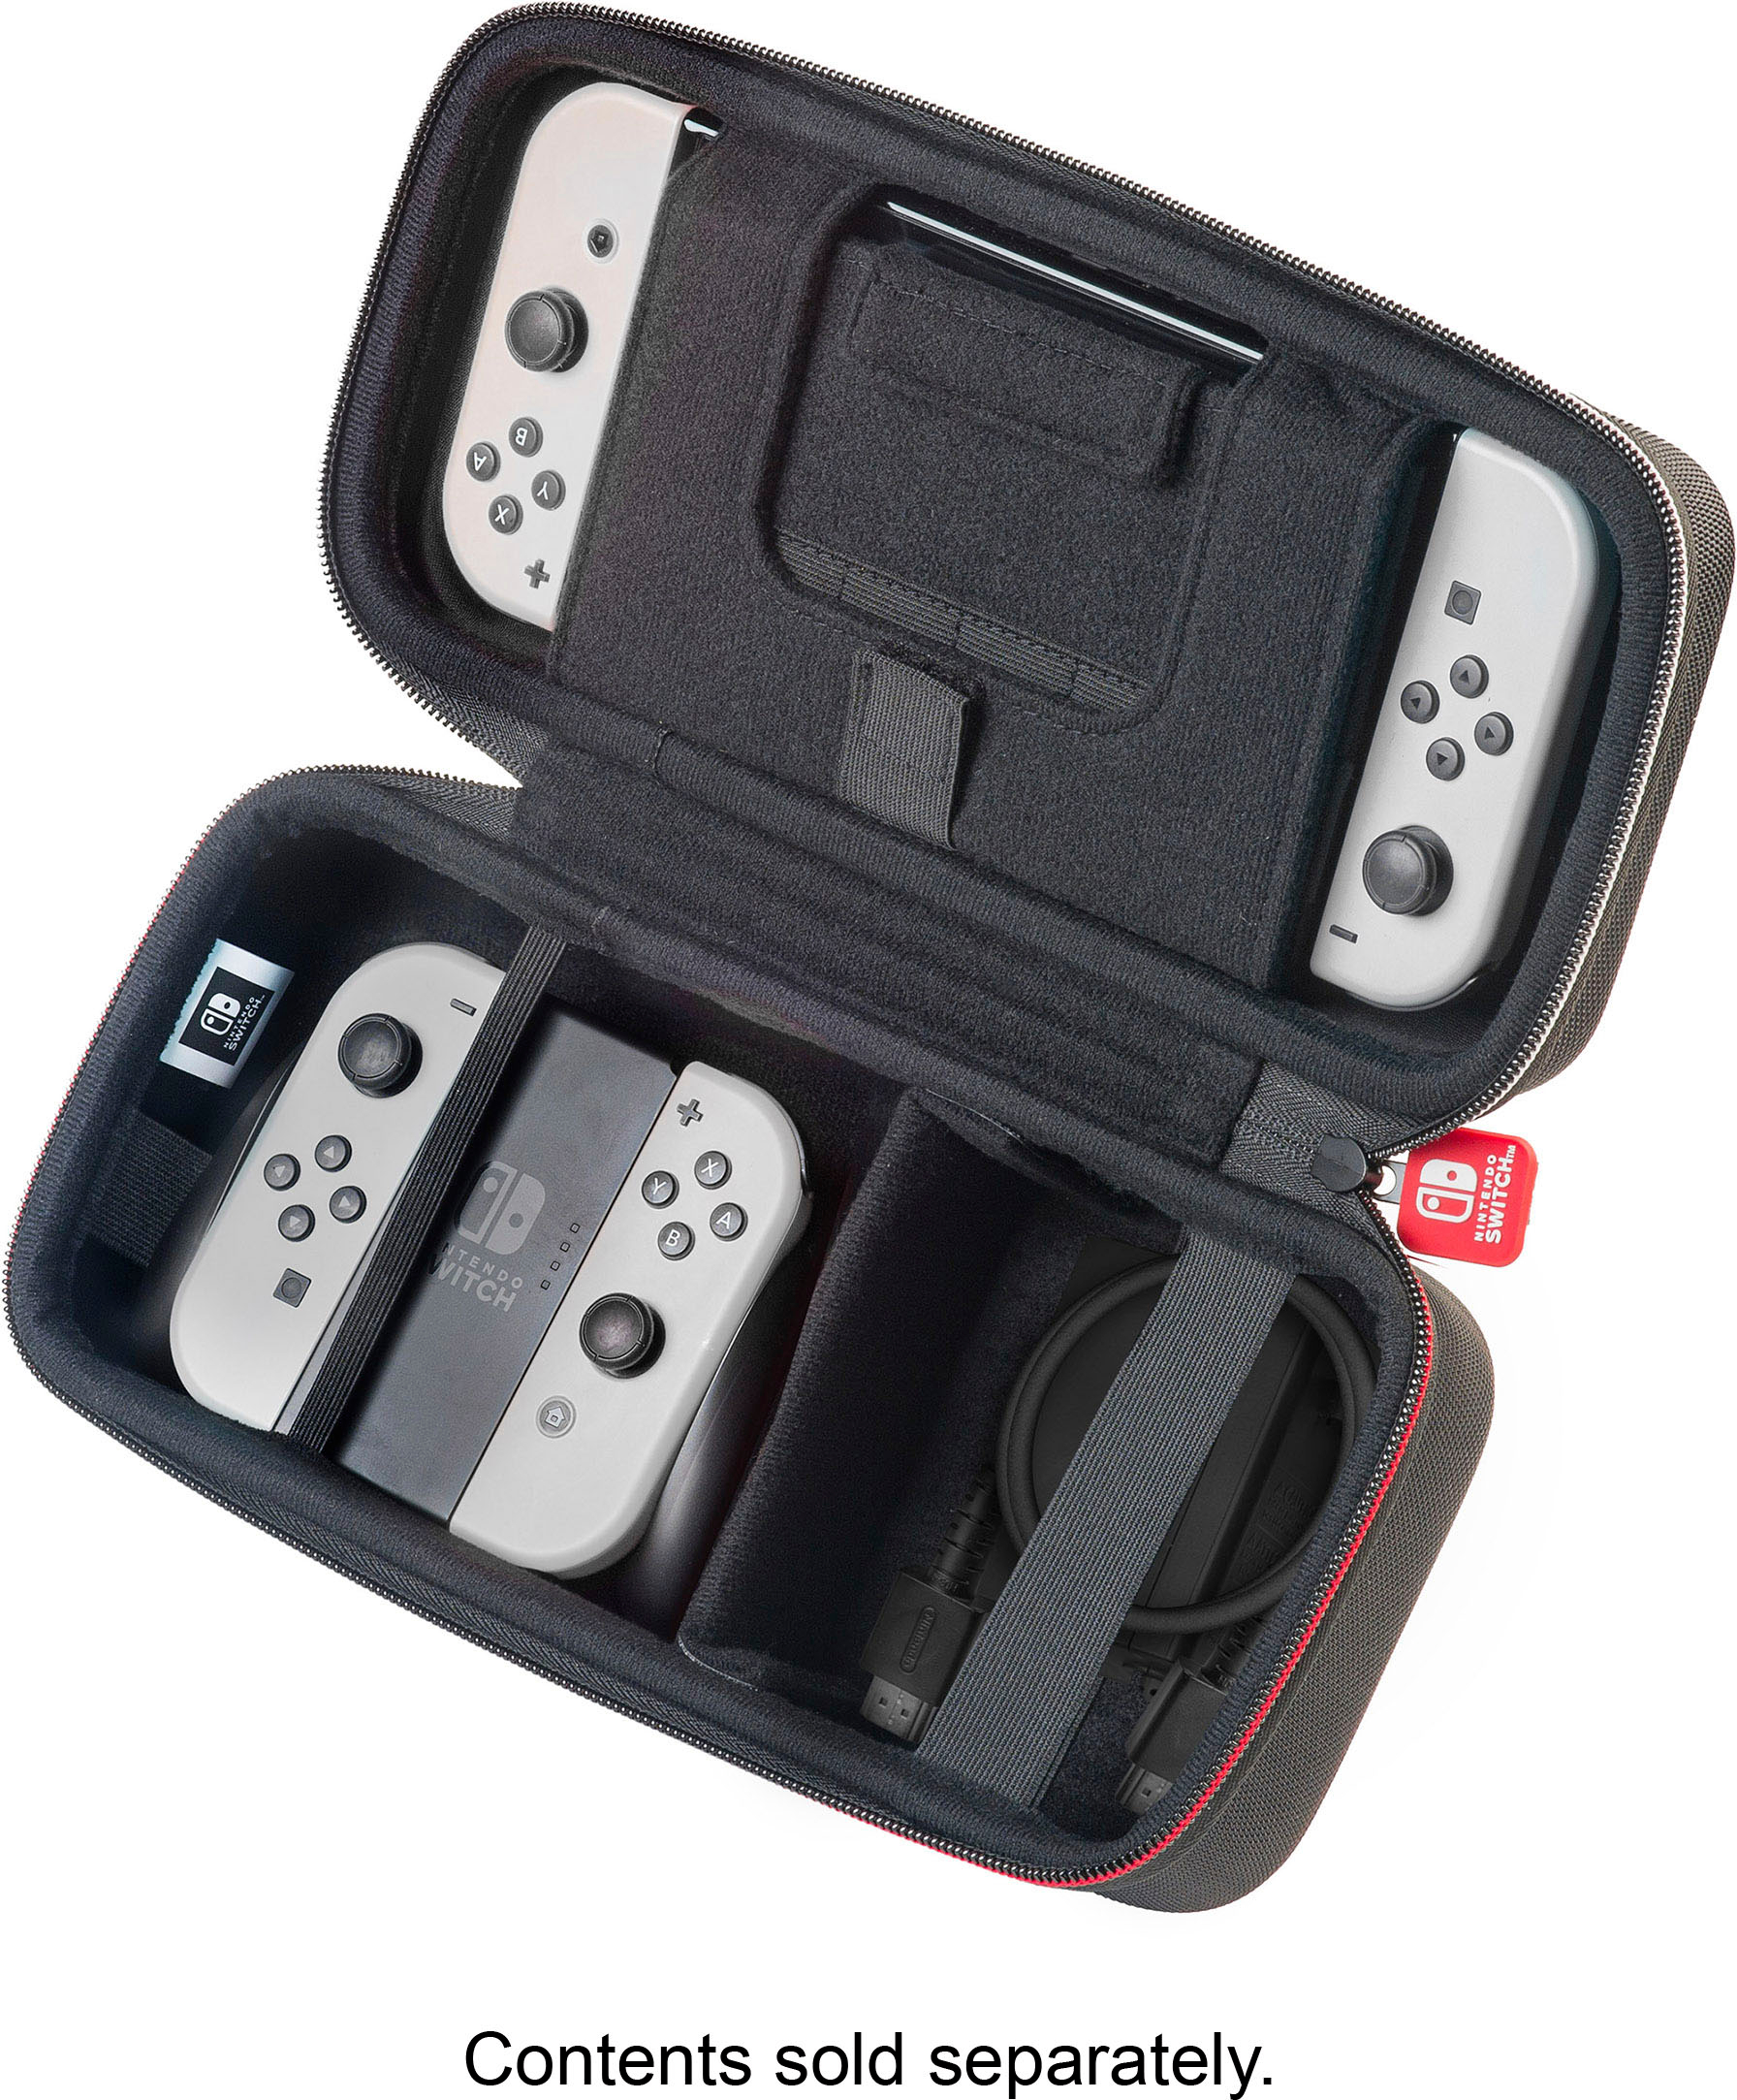   Basics Game Storage Case for 24 Nintendo Switch Games -  3.4 x 3.4 x 1 Inches, Black : Clothing, Shoes & Jewelry